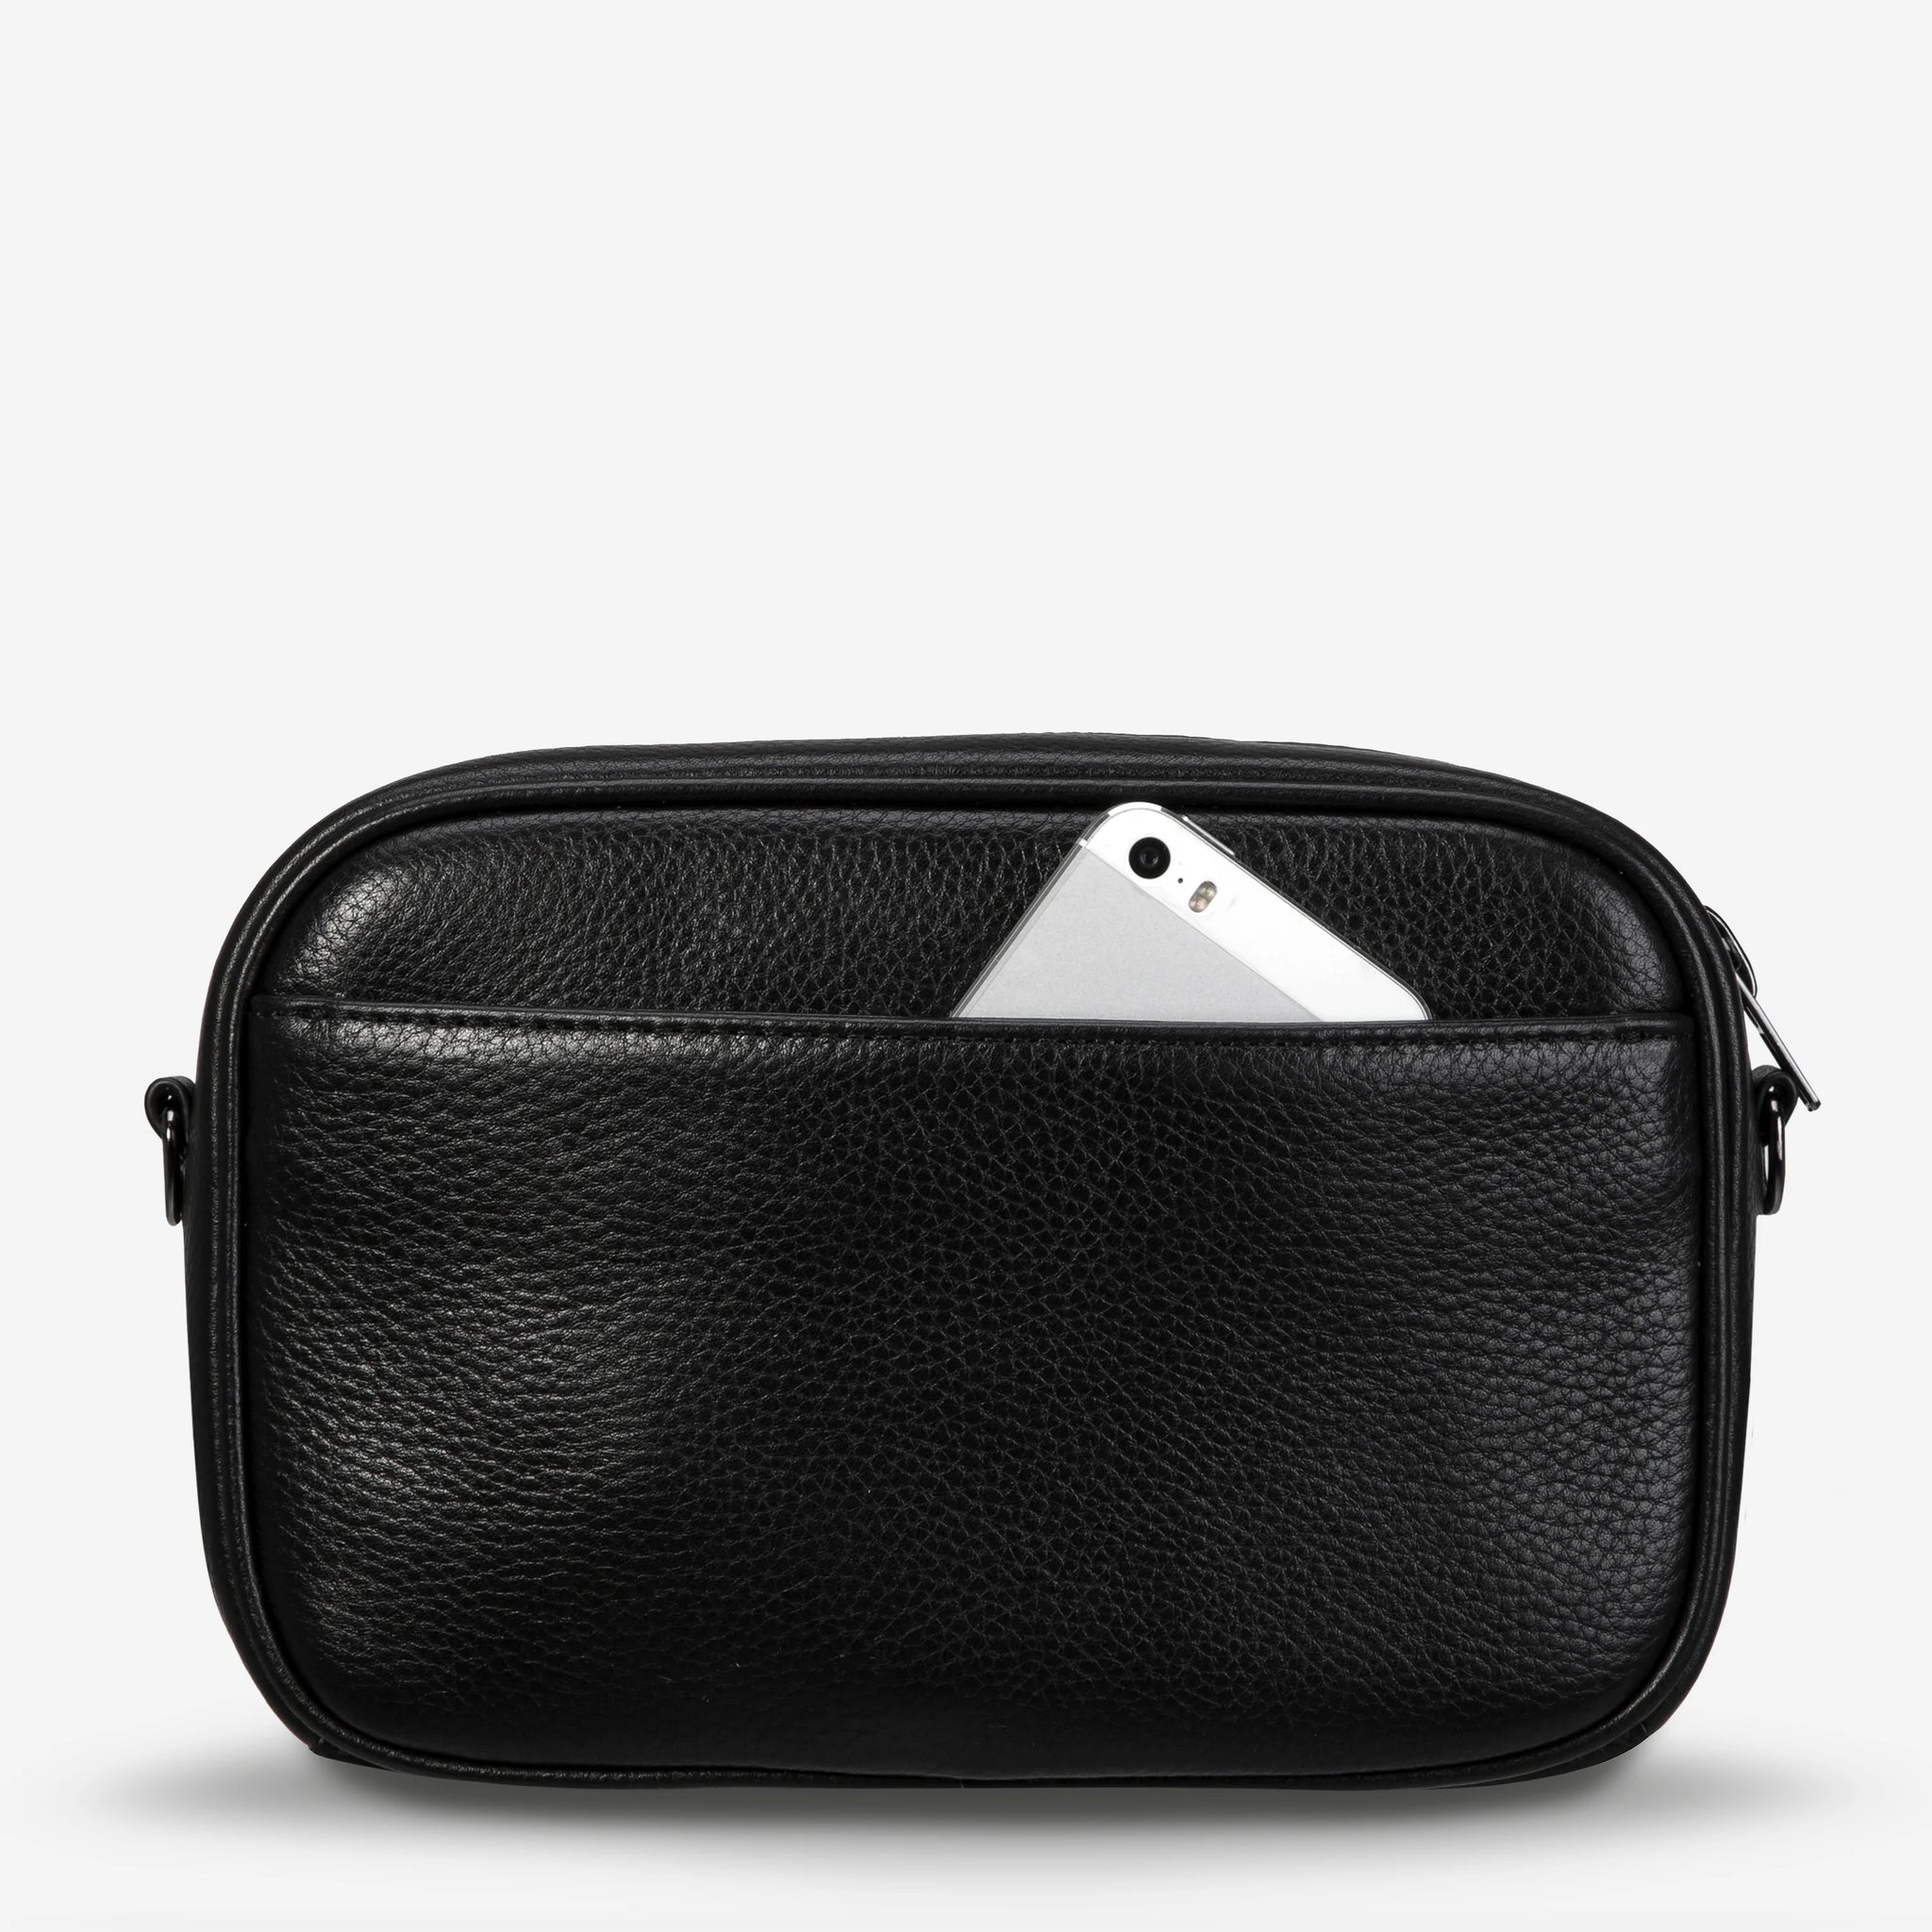 Status Anxiety Bag - Plunder - Black with Webbed Strap